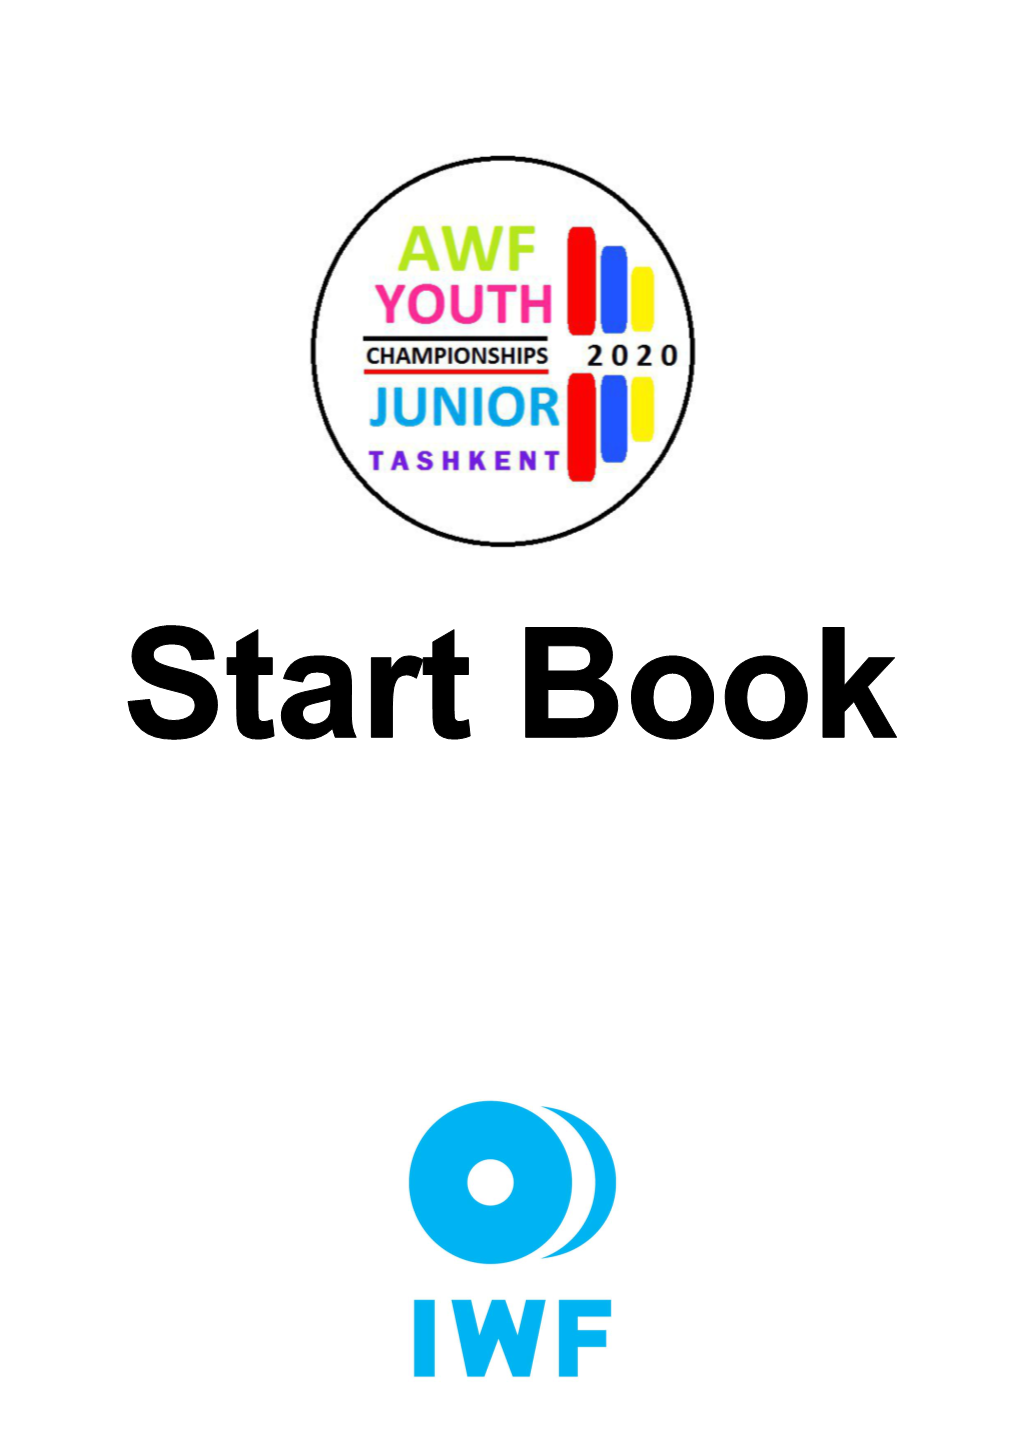 The Start Book of 2020 Asian Youth & Junior